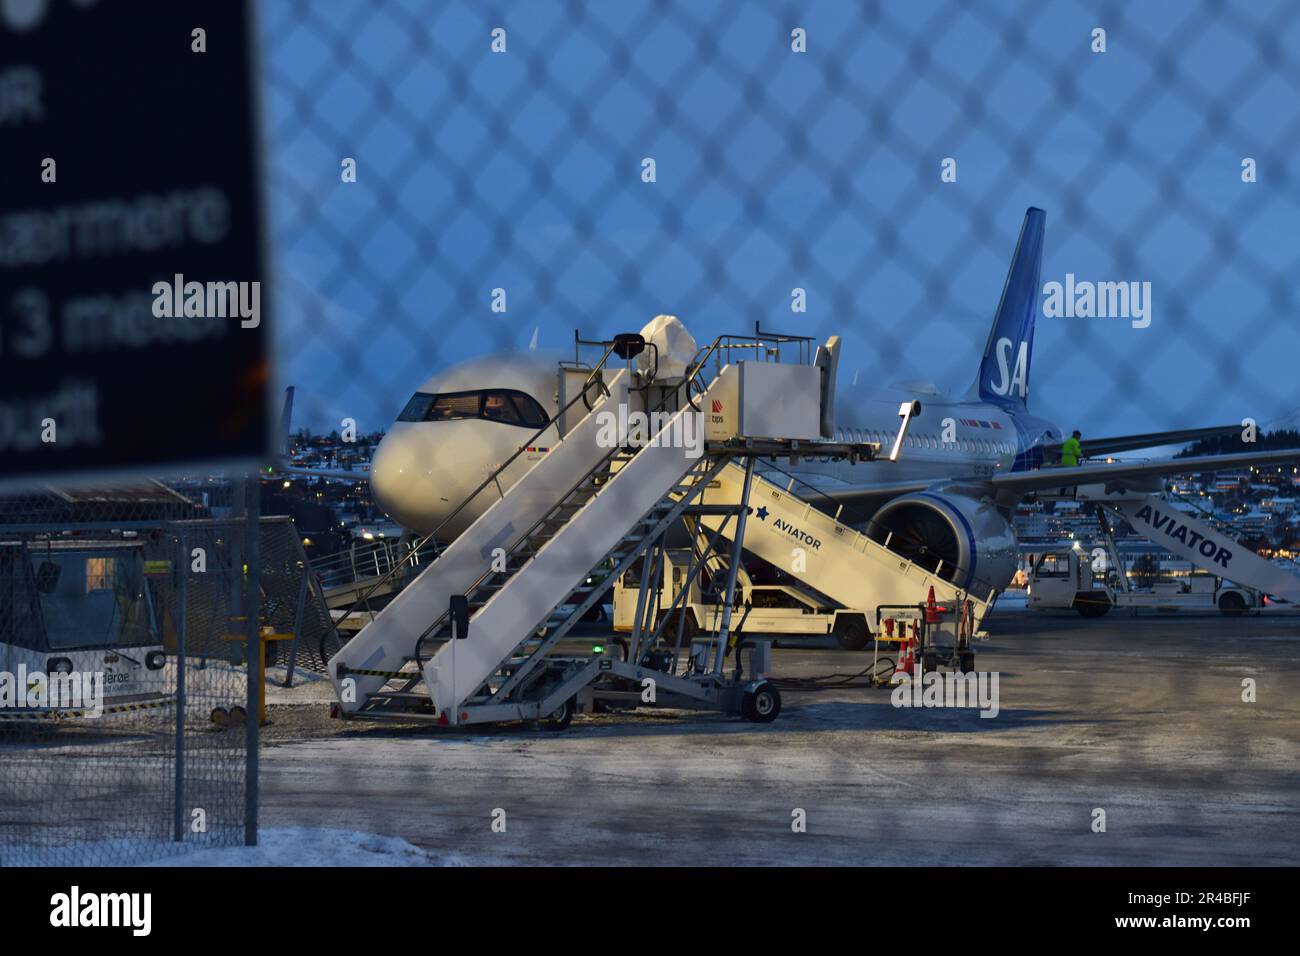 A white commercial aircraft is parked on a tarmac runway at an airport terminal Stock Photo